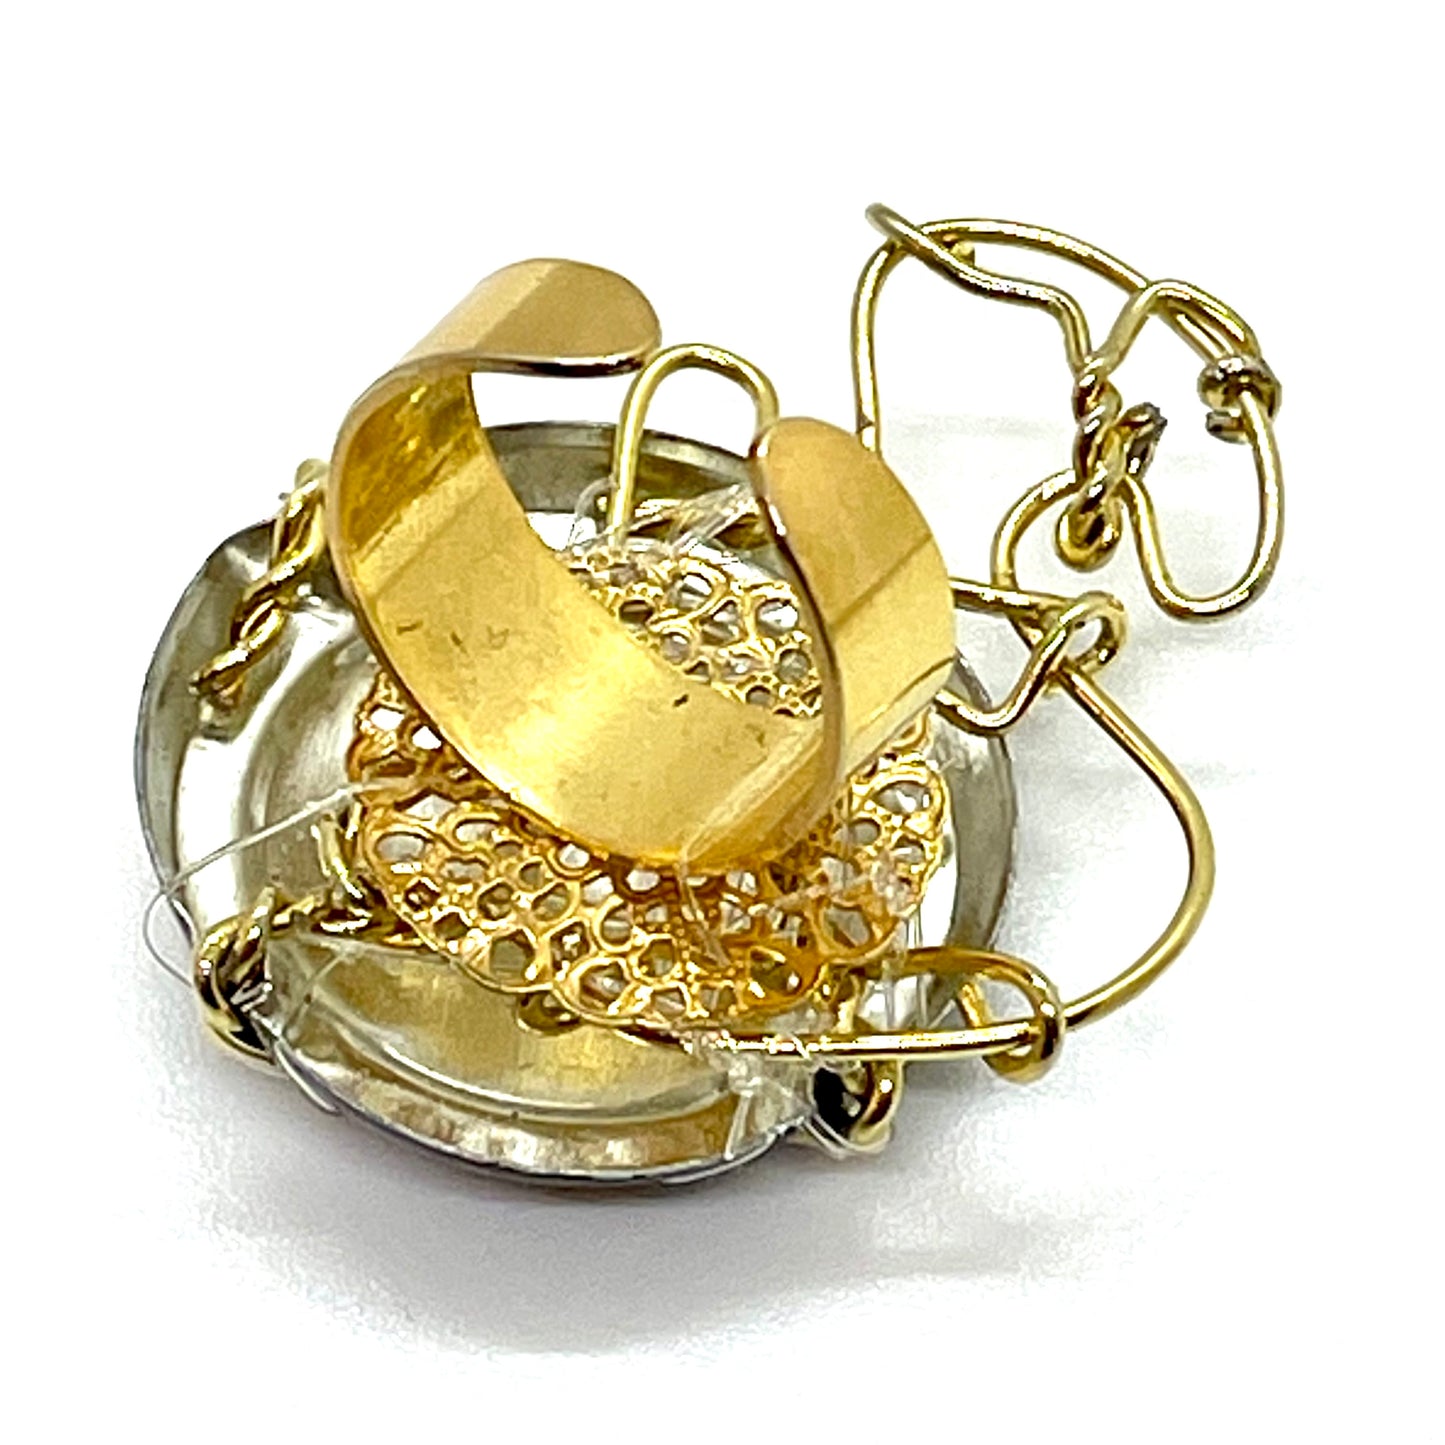 EIFFEL adjustable ring muzzled with fine gold